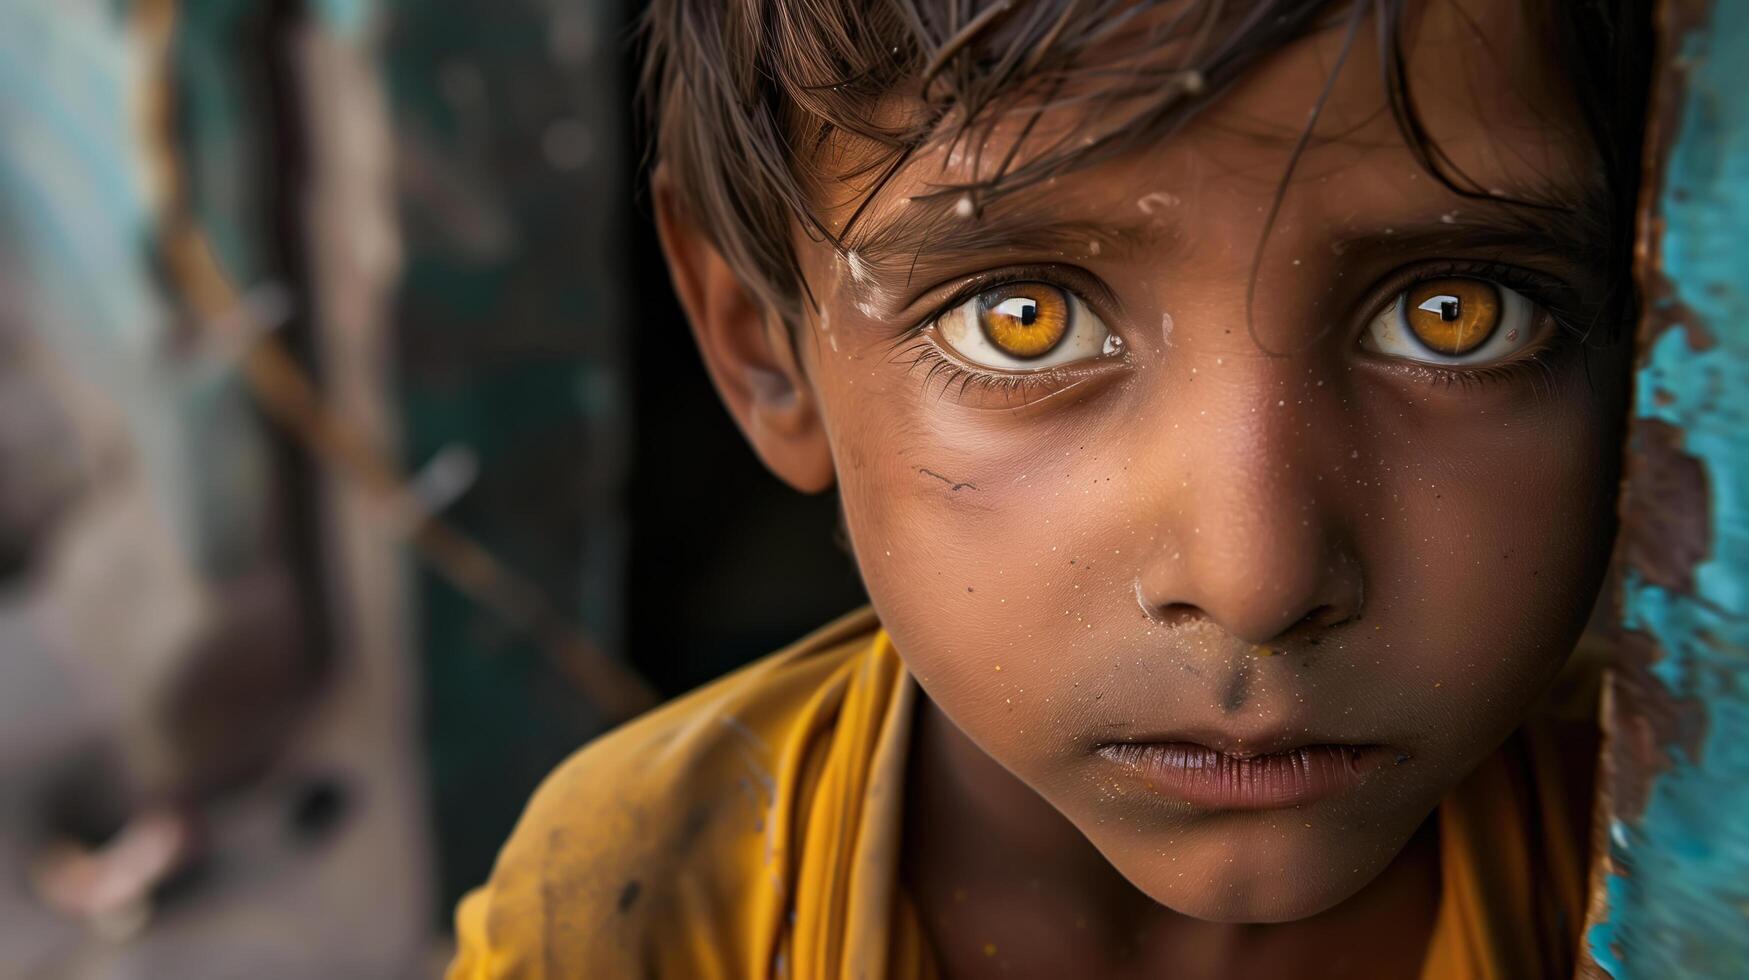 Small children gazes solemnly at the camera, eyes reflecting innocence and vulnerability. . photo